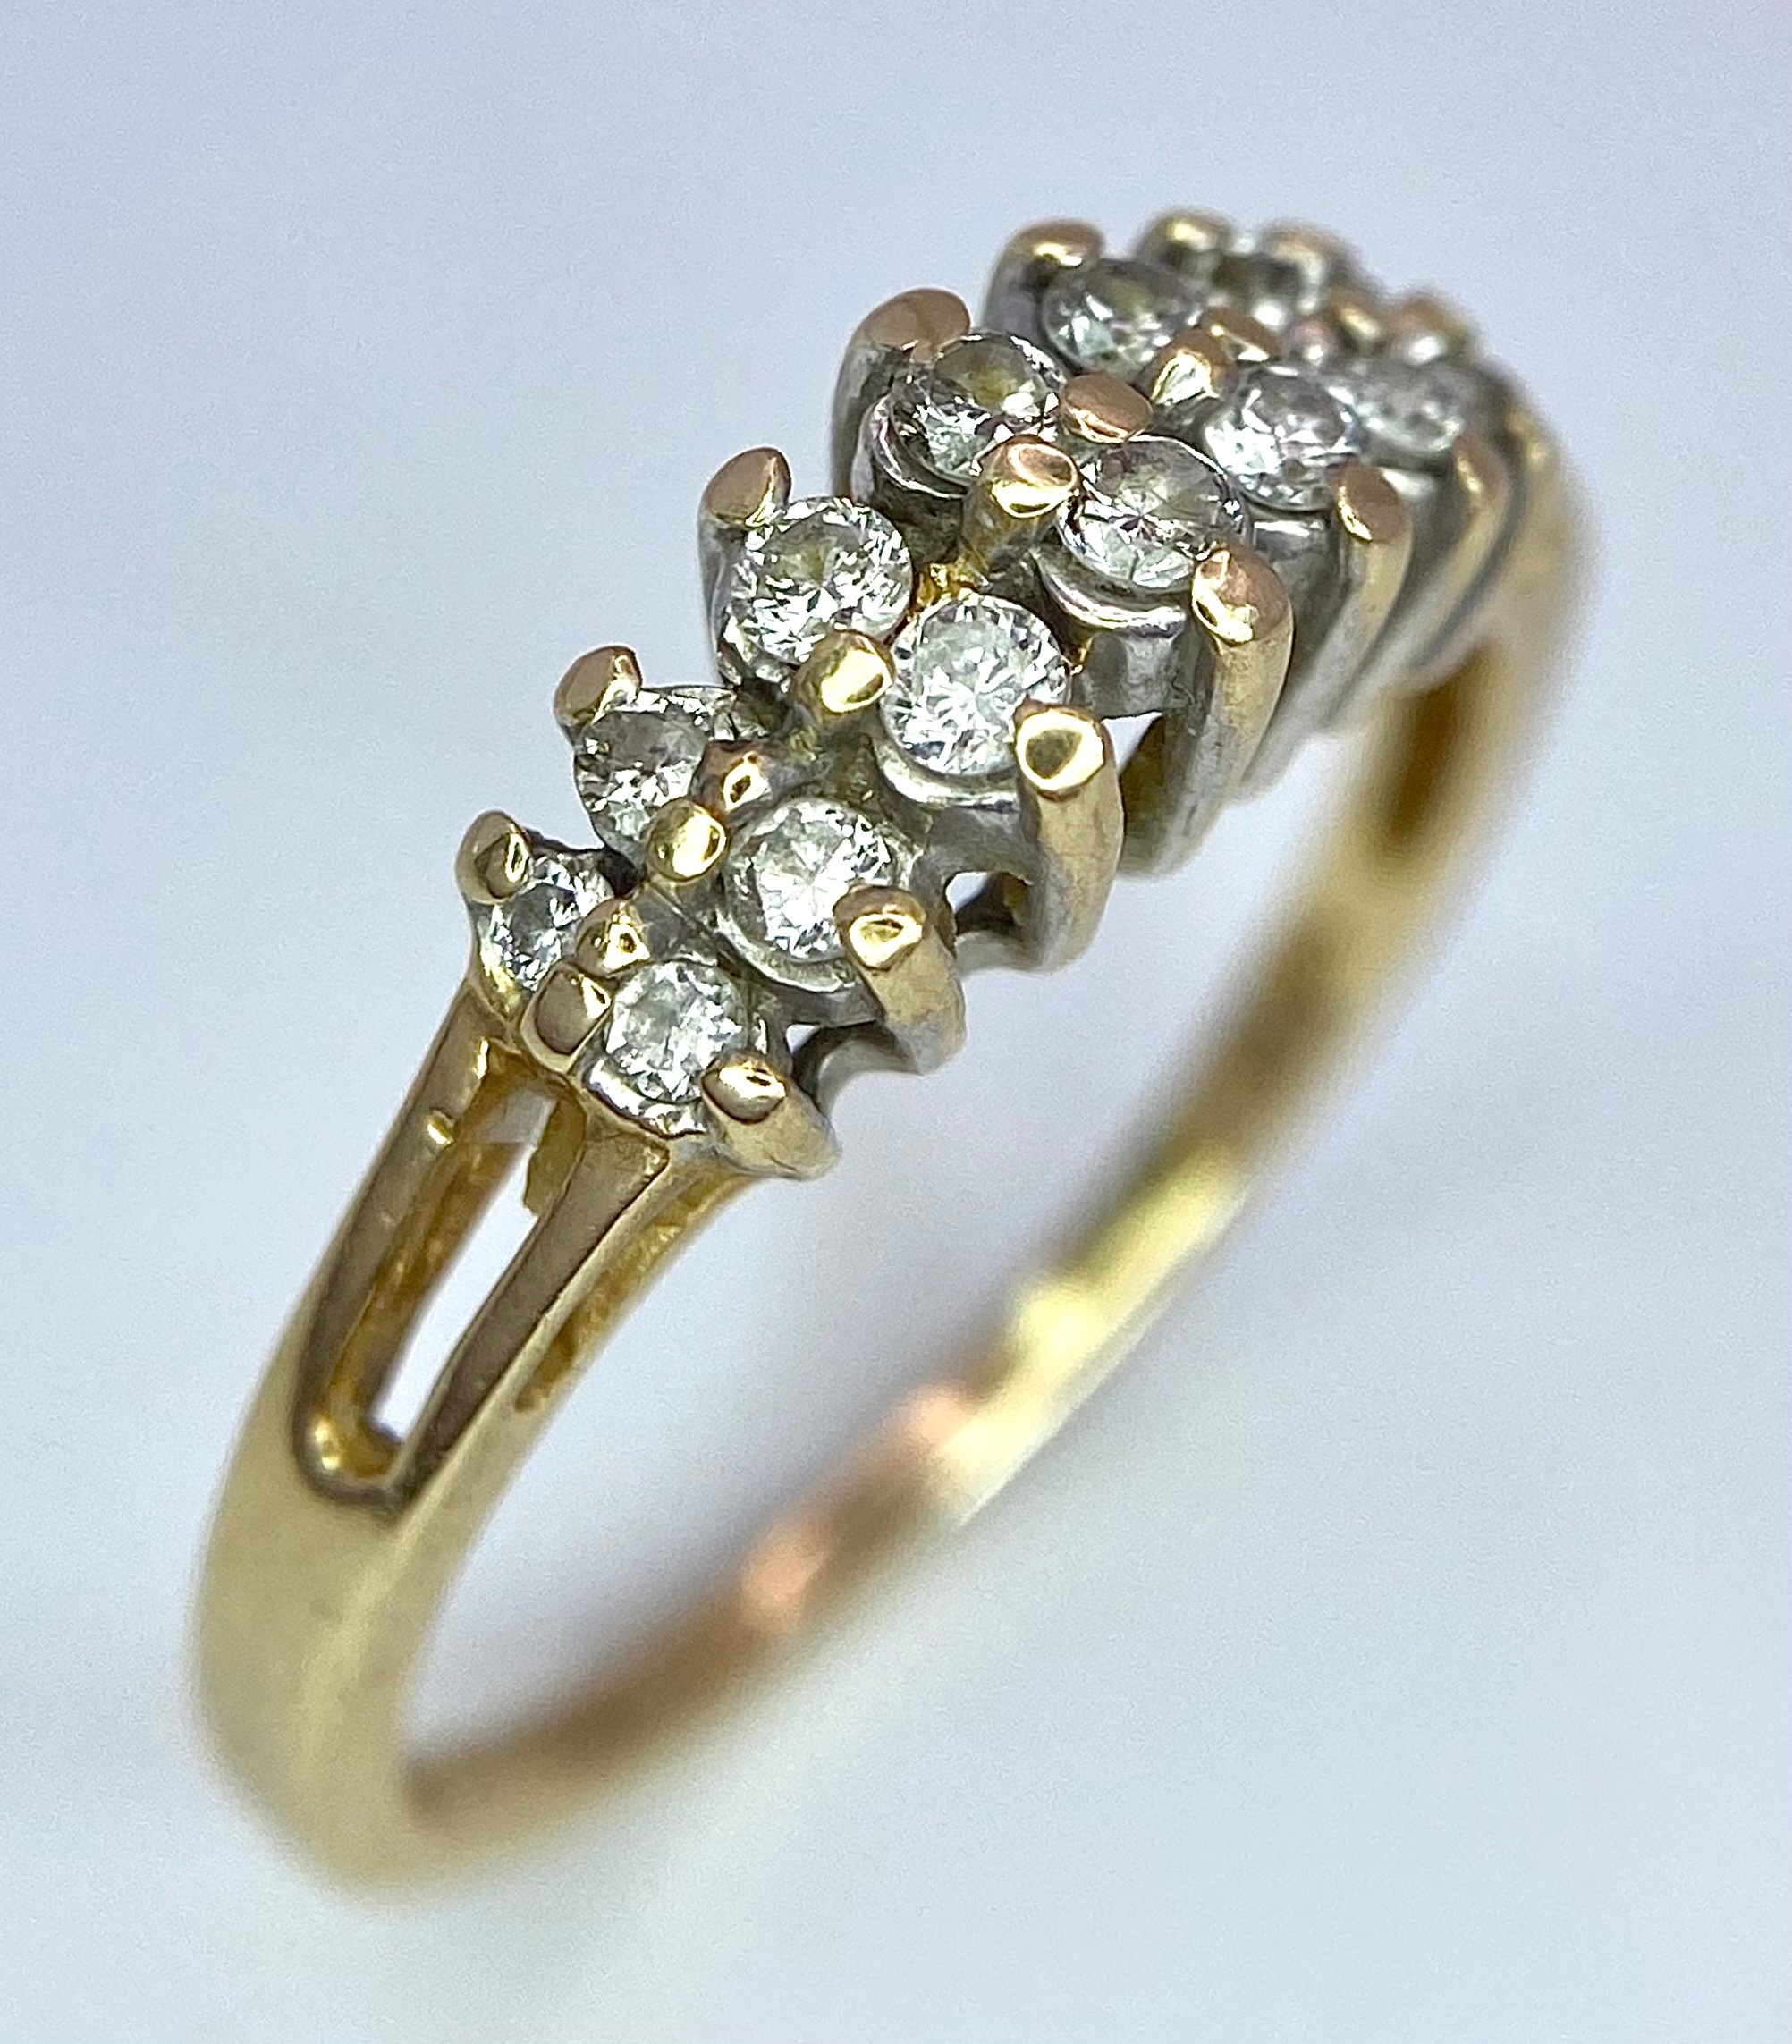 A 9K YELLOW GOLD DIAMOND BAND RING 3.1G SIZE P 1/2. SC 9067 - Image 3 of 7